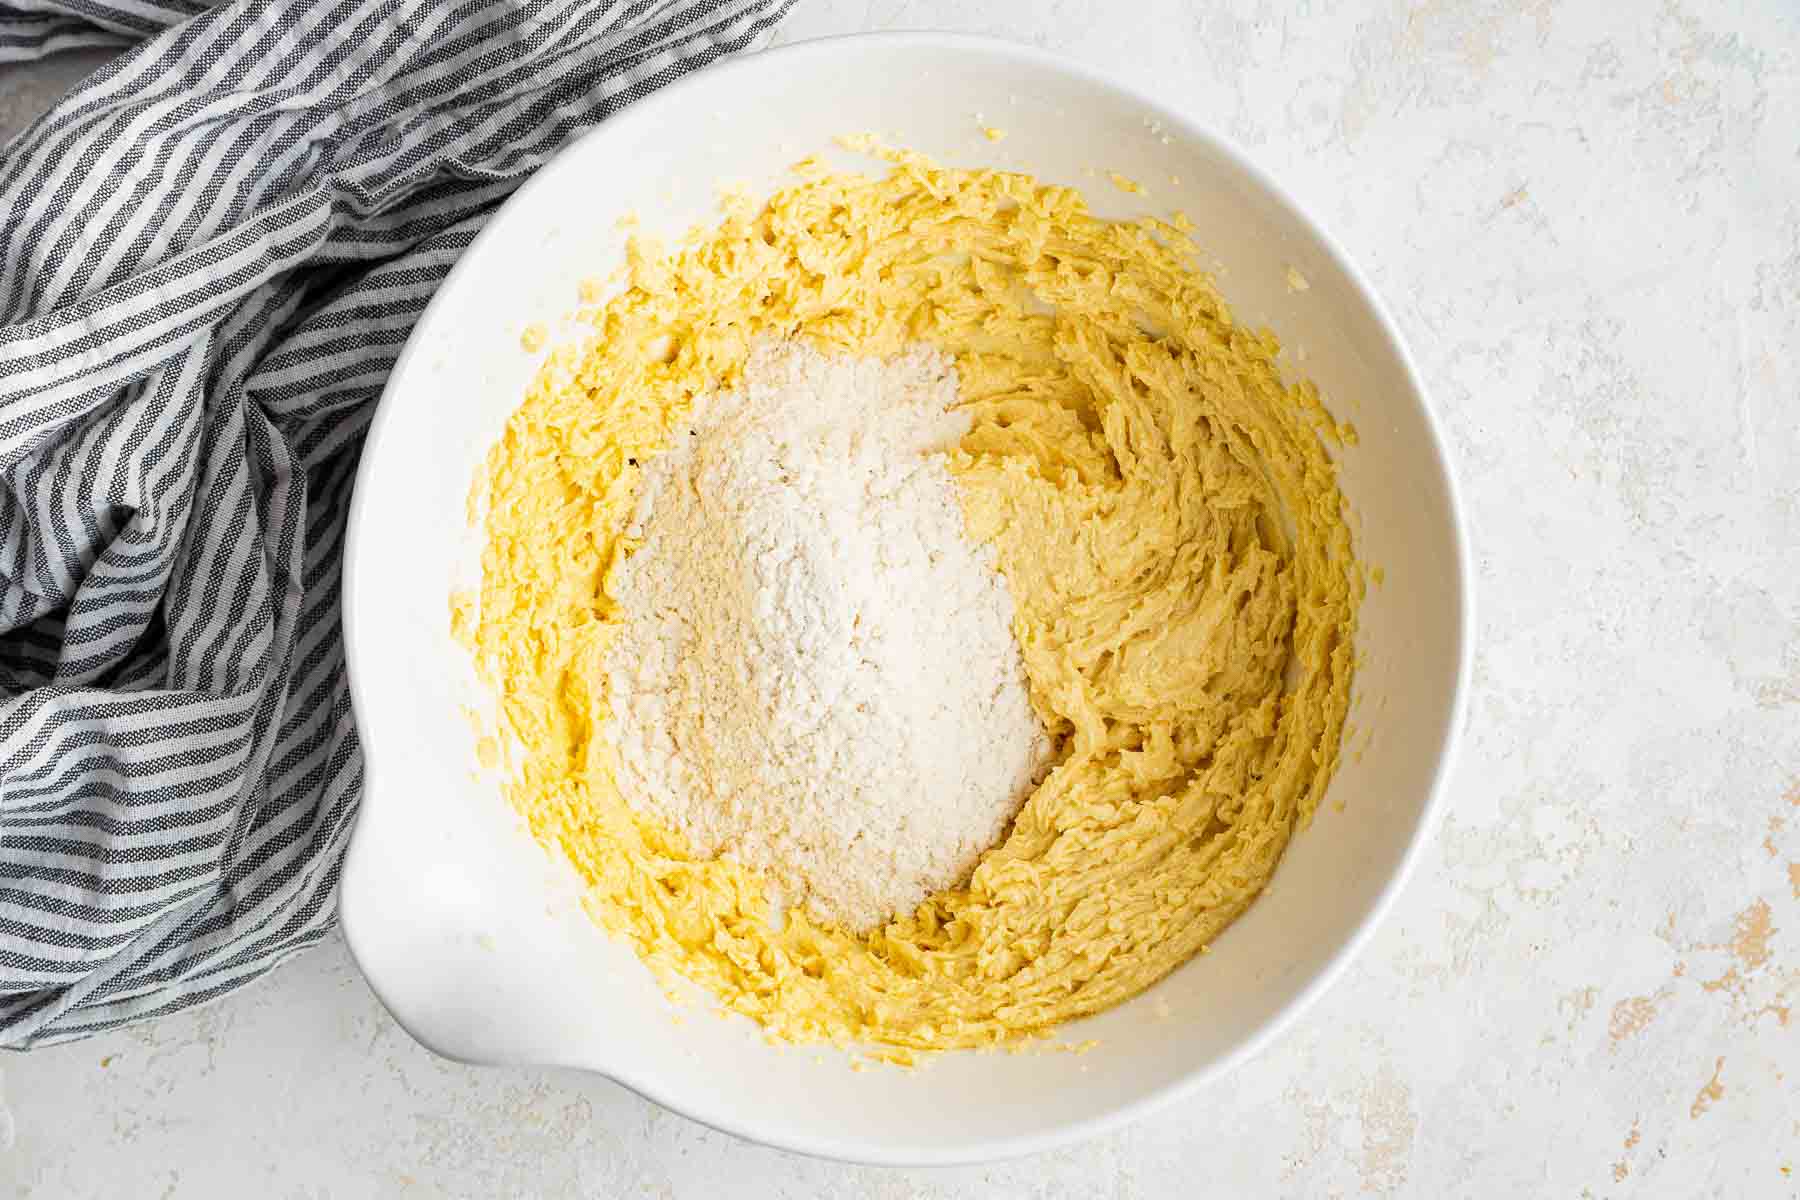 Half of white flour on top of yellow batter in white bowl with kitchen towel on side.